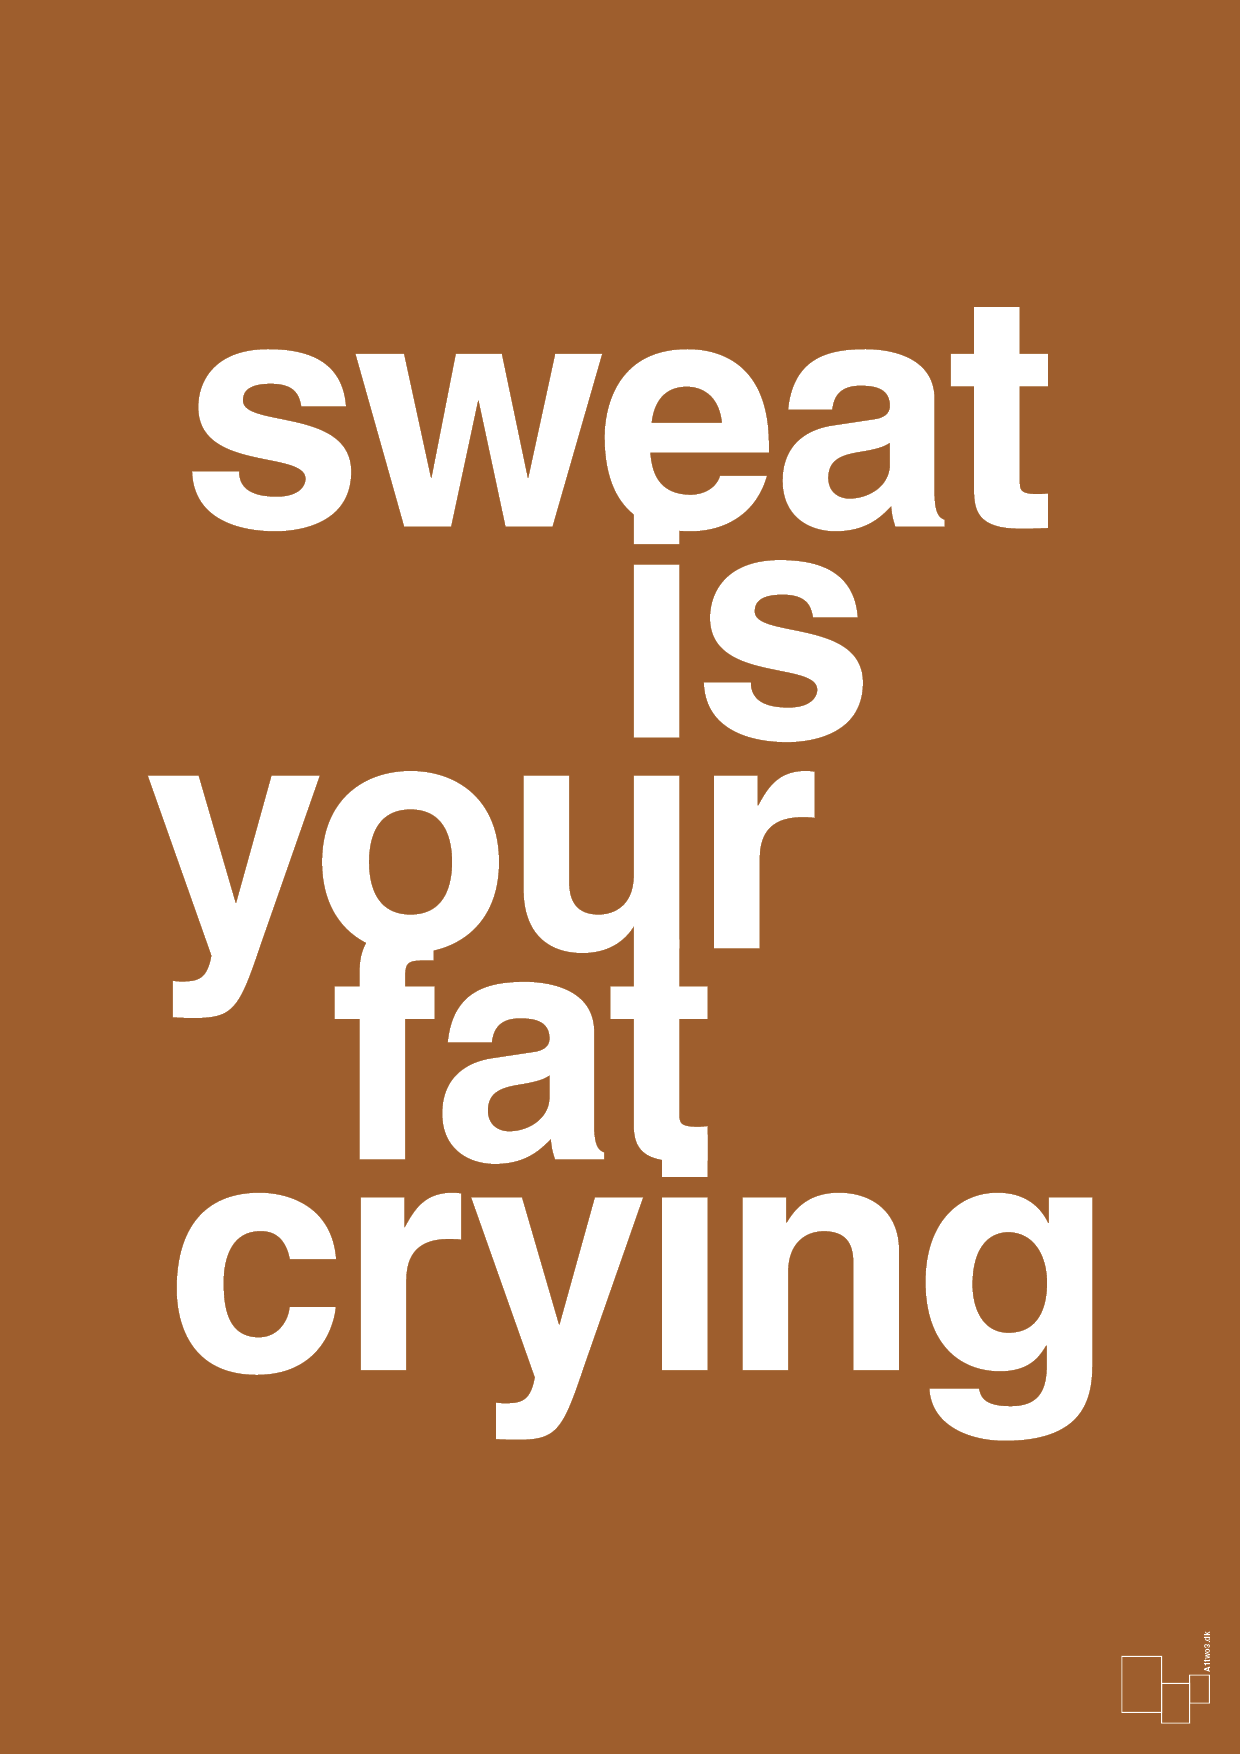 sweat is your fat crying - Plakat med Sport & Fritid i Cognac